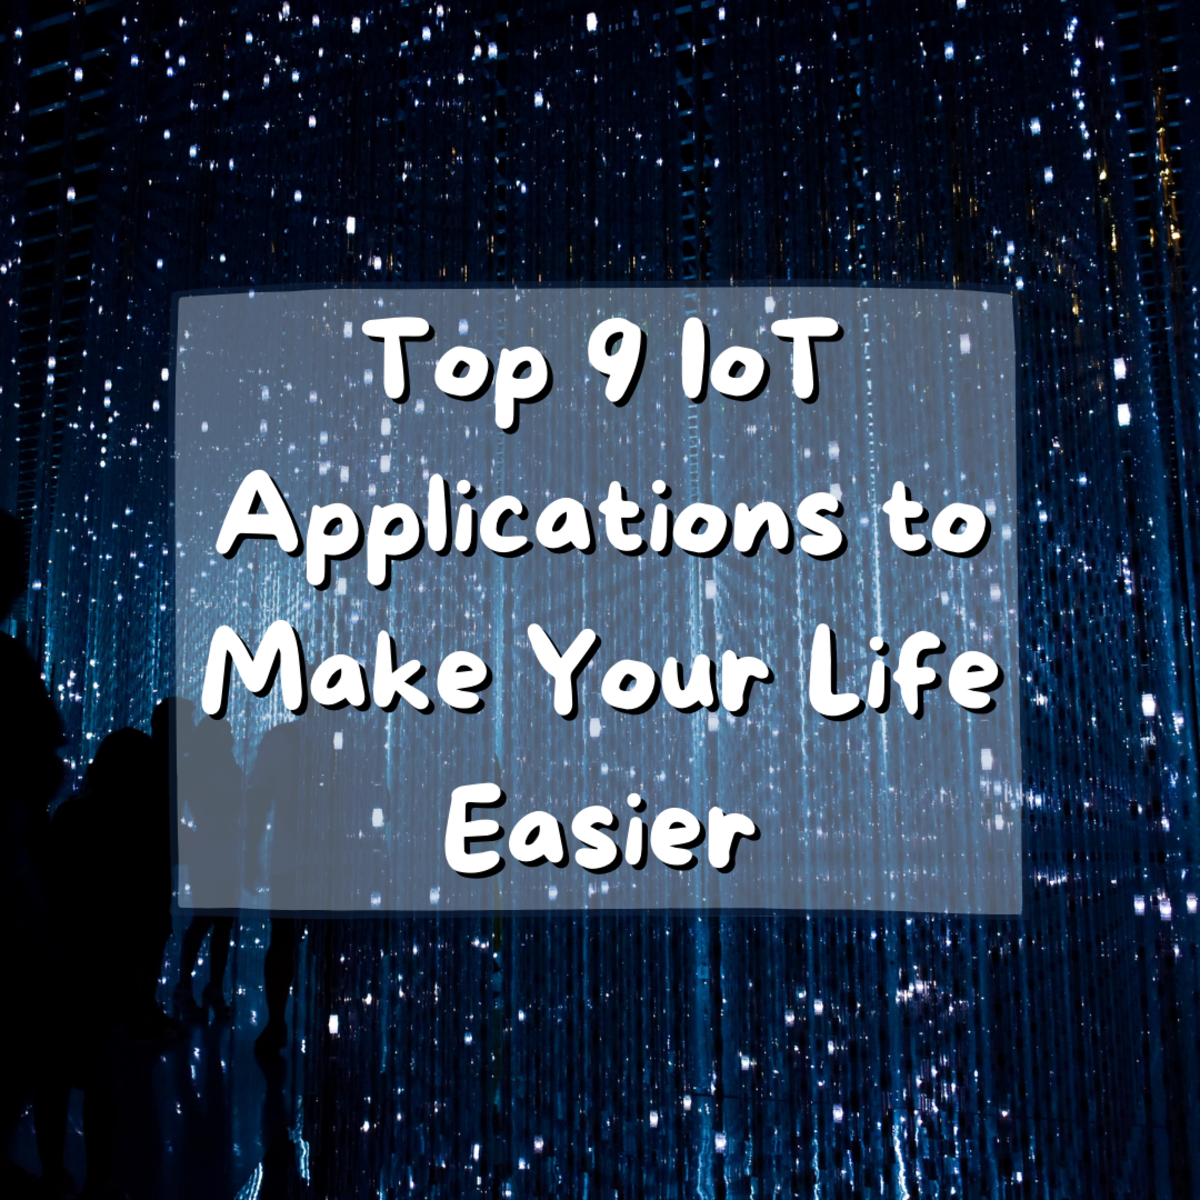 Read on to learn about the Internet of Things (IoT), the cloud, and 9 amazing IoT application that can revolutionize and simplify your life.